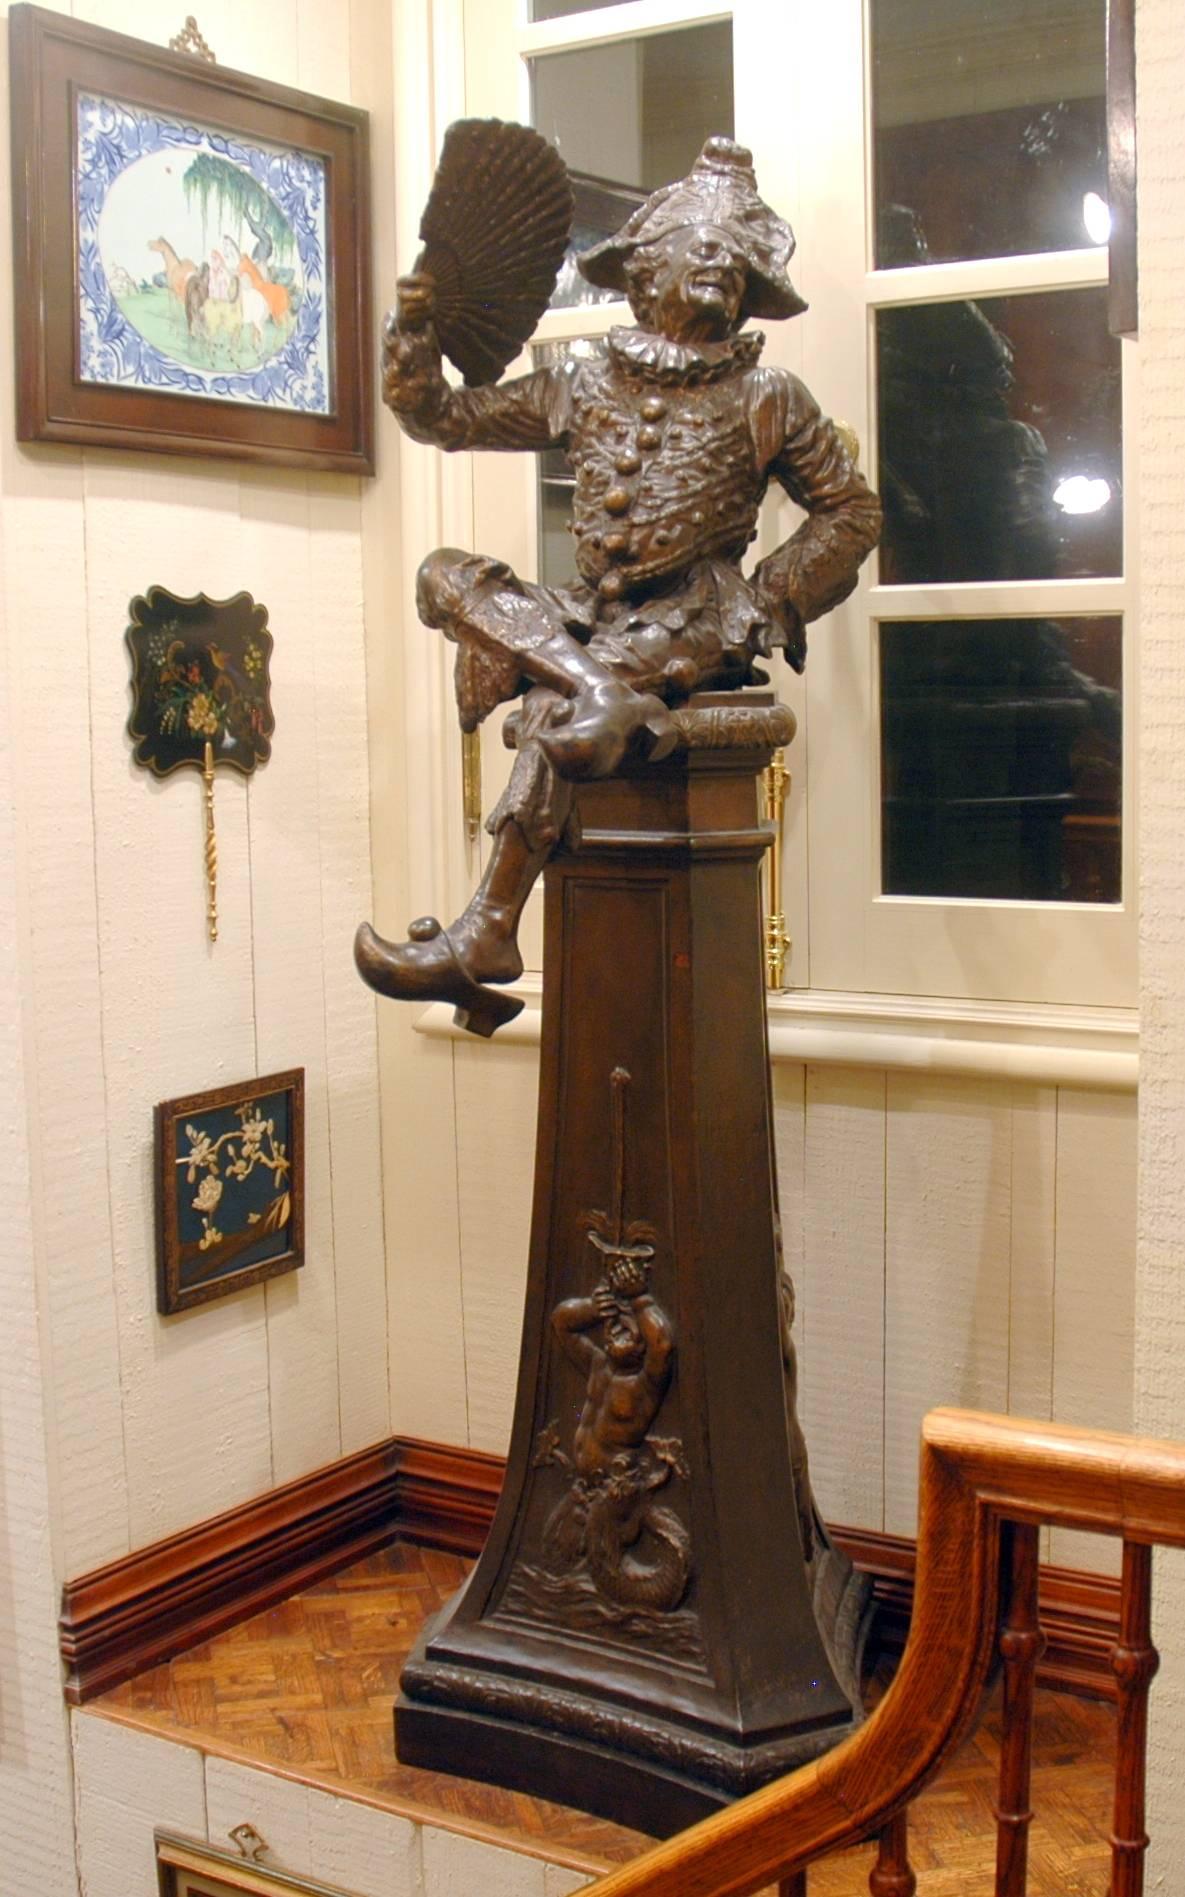 Delightful Court Jester sculpture with a great expression on his face.

The details of this piece are amazing, from the fan he is holding, to the half-off shoe, folds and buttons on his tunic.

Sculpted by LeBlanc.
Foundry was Tusey under A.